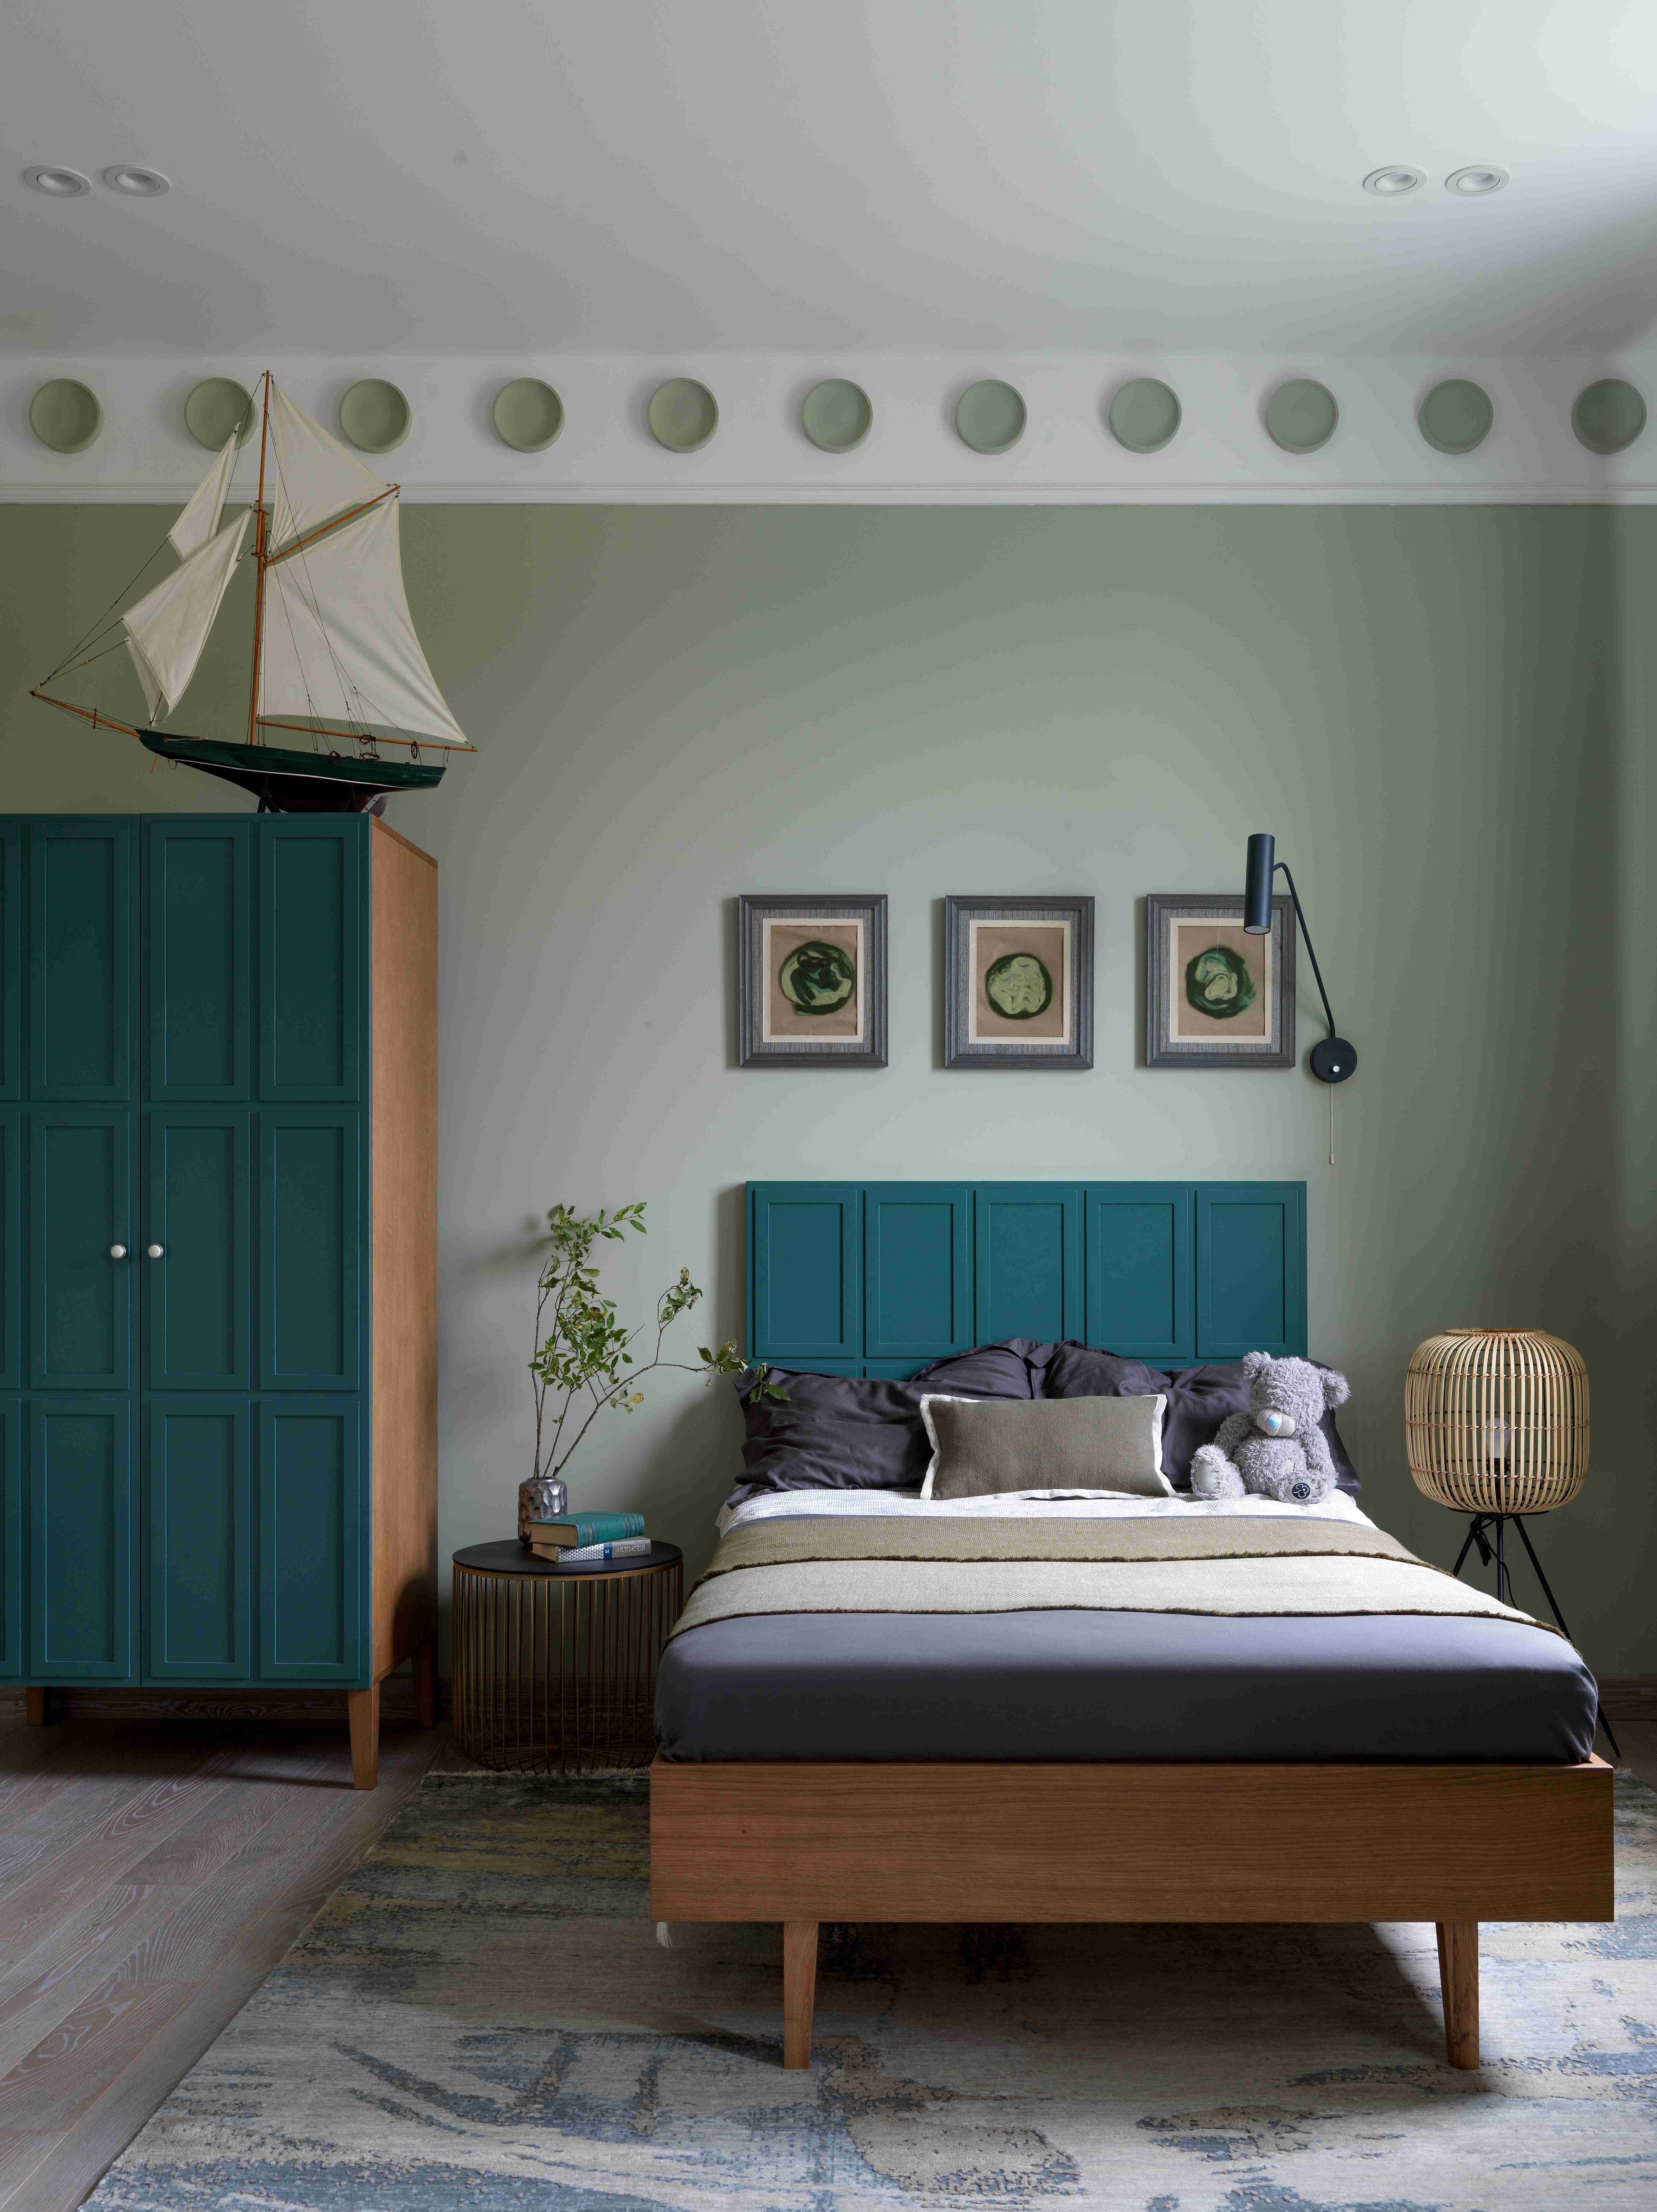 Pestovo House's bedroom with teal door and headboard, and sage green walls.